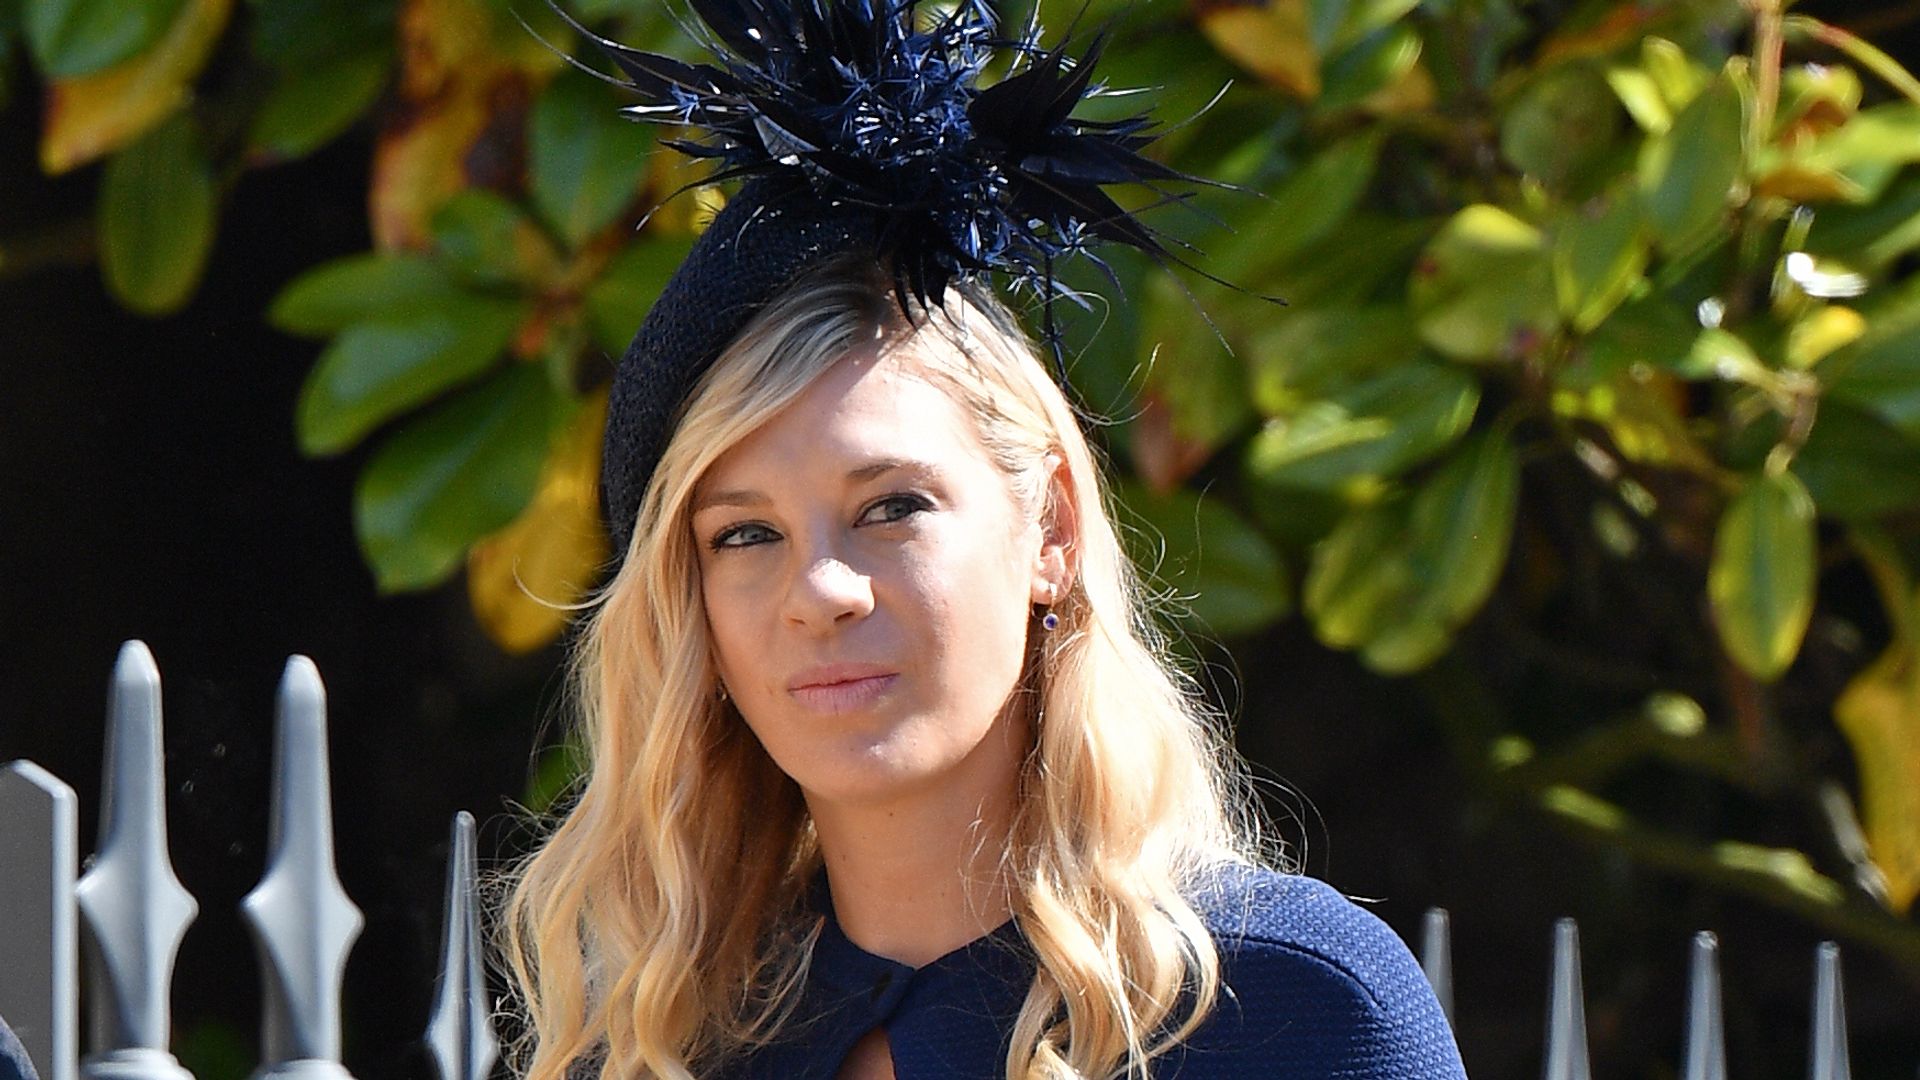 Chelsy Davy attended the wedding of Prince Harry to Ms Meghan Markle in 2018 